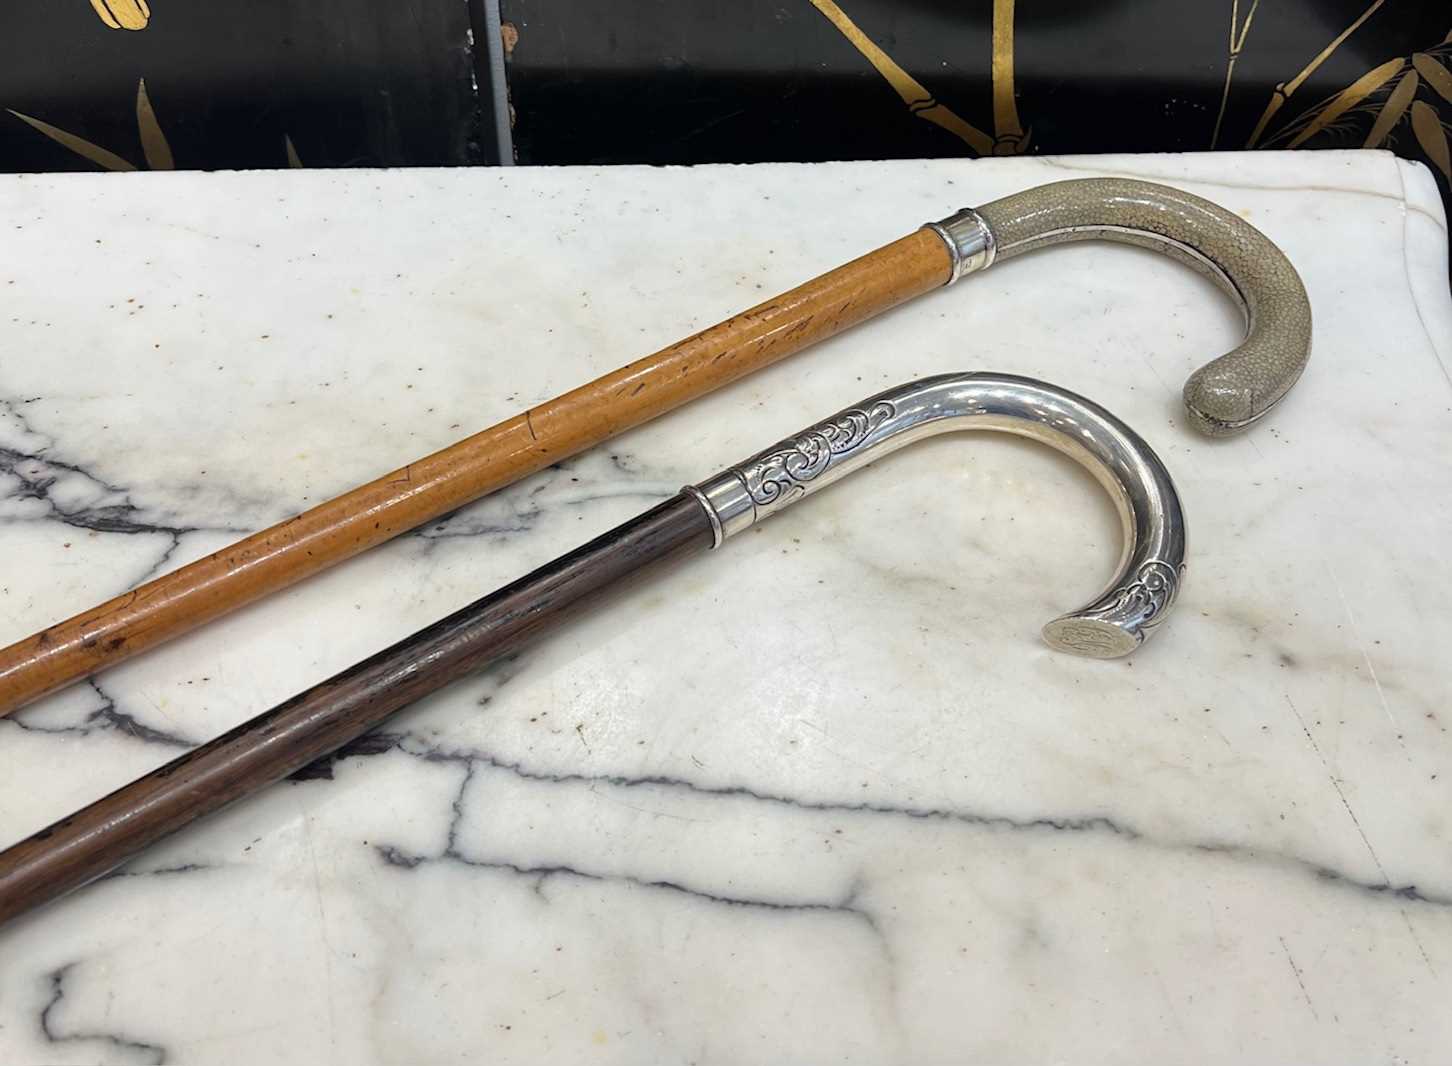 A LATE 19TH / EARLY 20TH CENTURY SHAGREEN AND SILVER HANDLED WALKING CANE